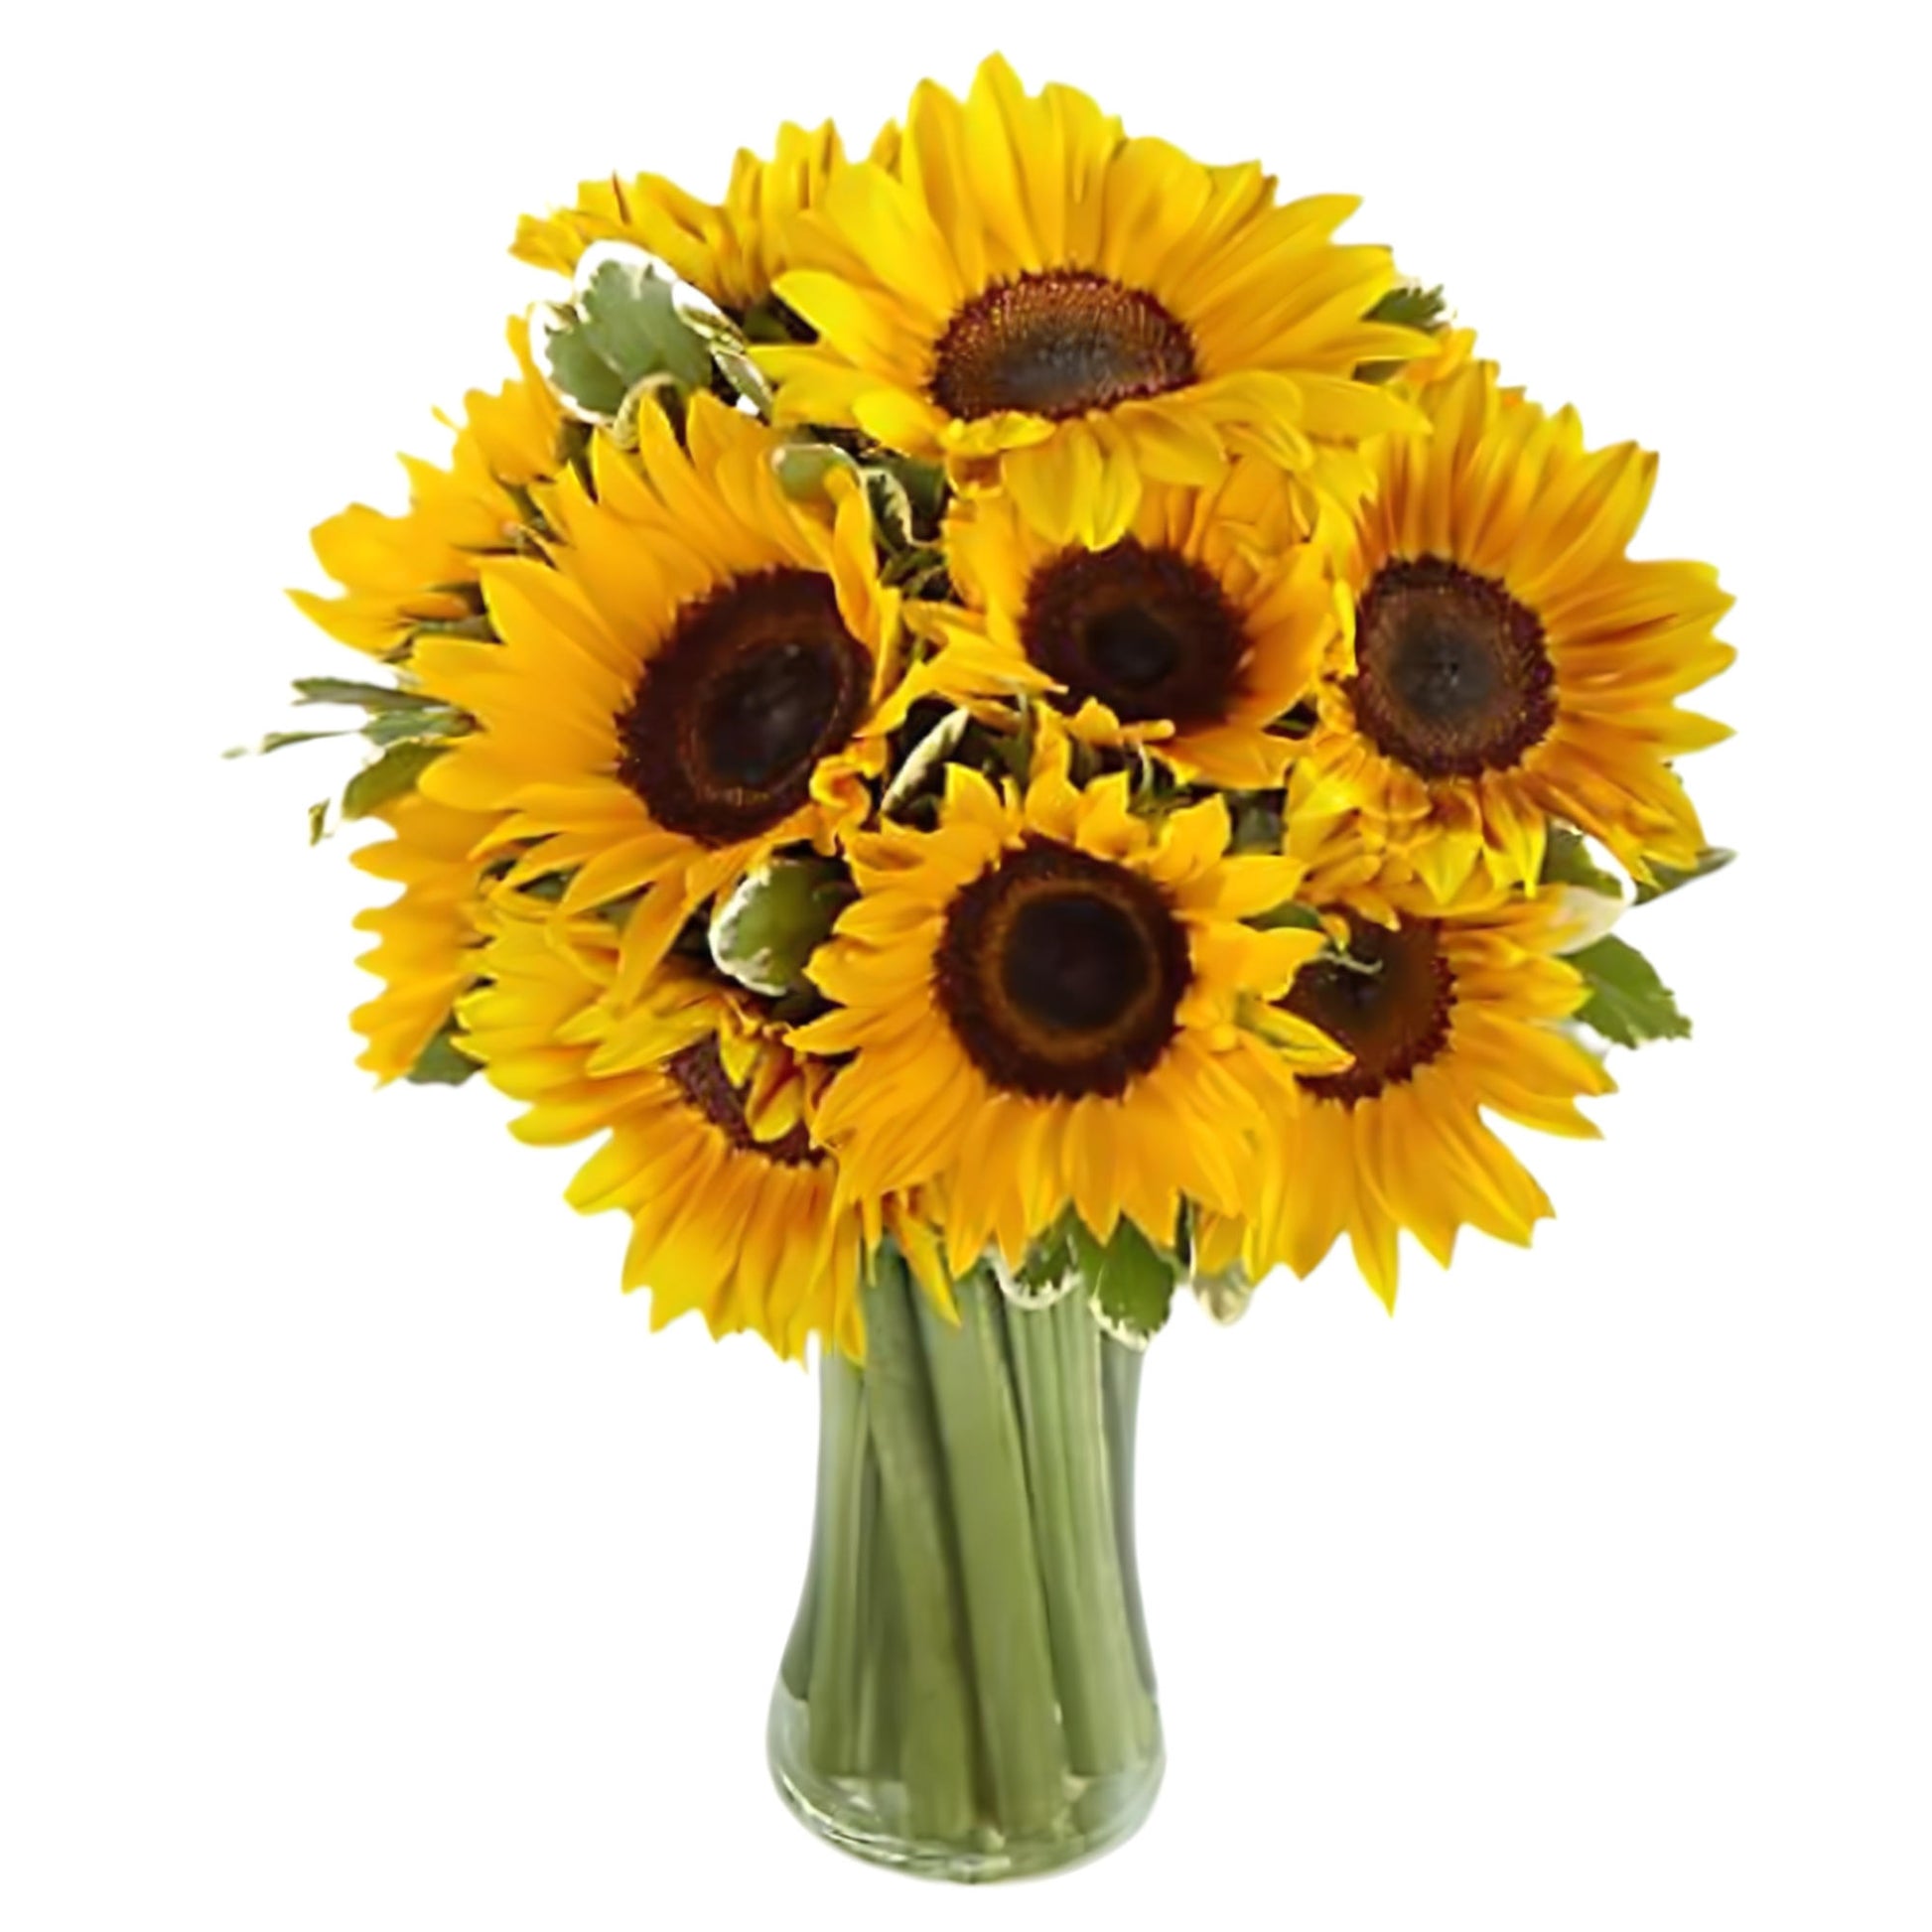 Our Bright-Sunflower-Bouquet of long-lasting blooms hand crafted by Queens Flower Delivery brings that just-picked-from-the-meadow feeling.